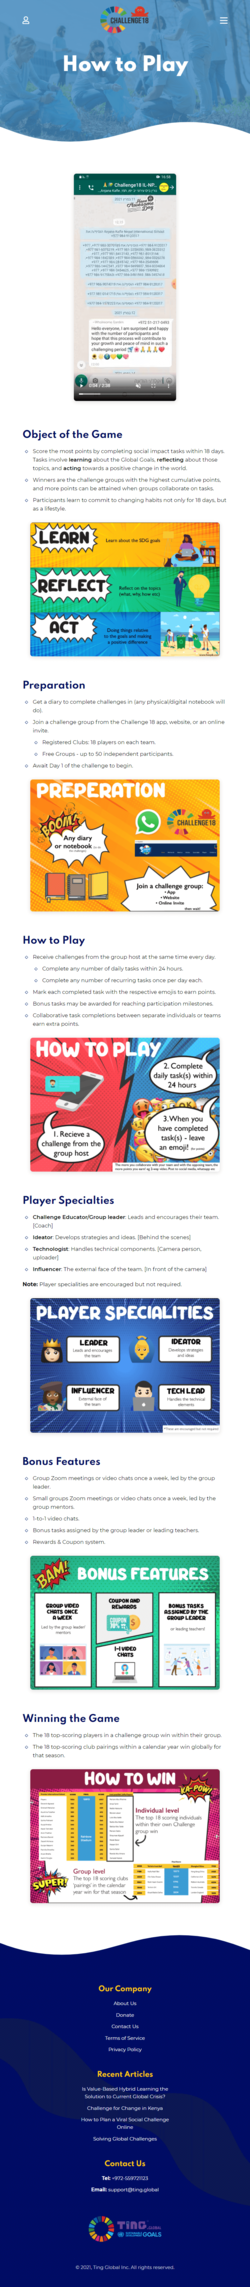 Tablet – How to Play